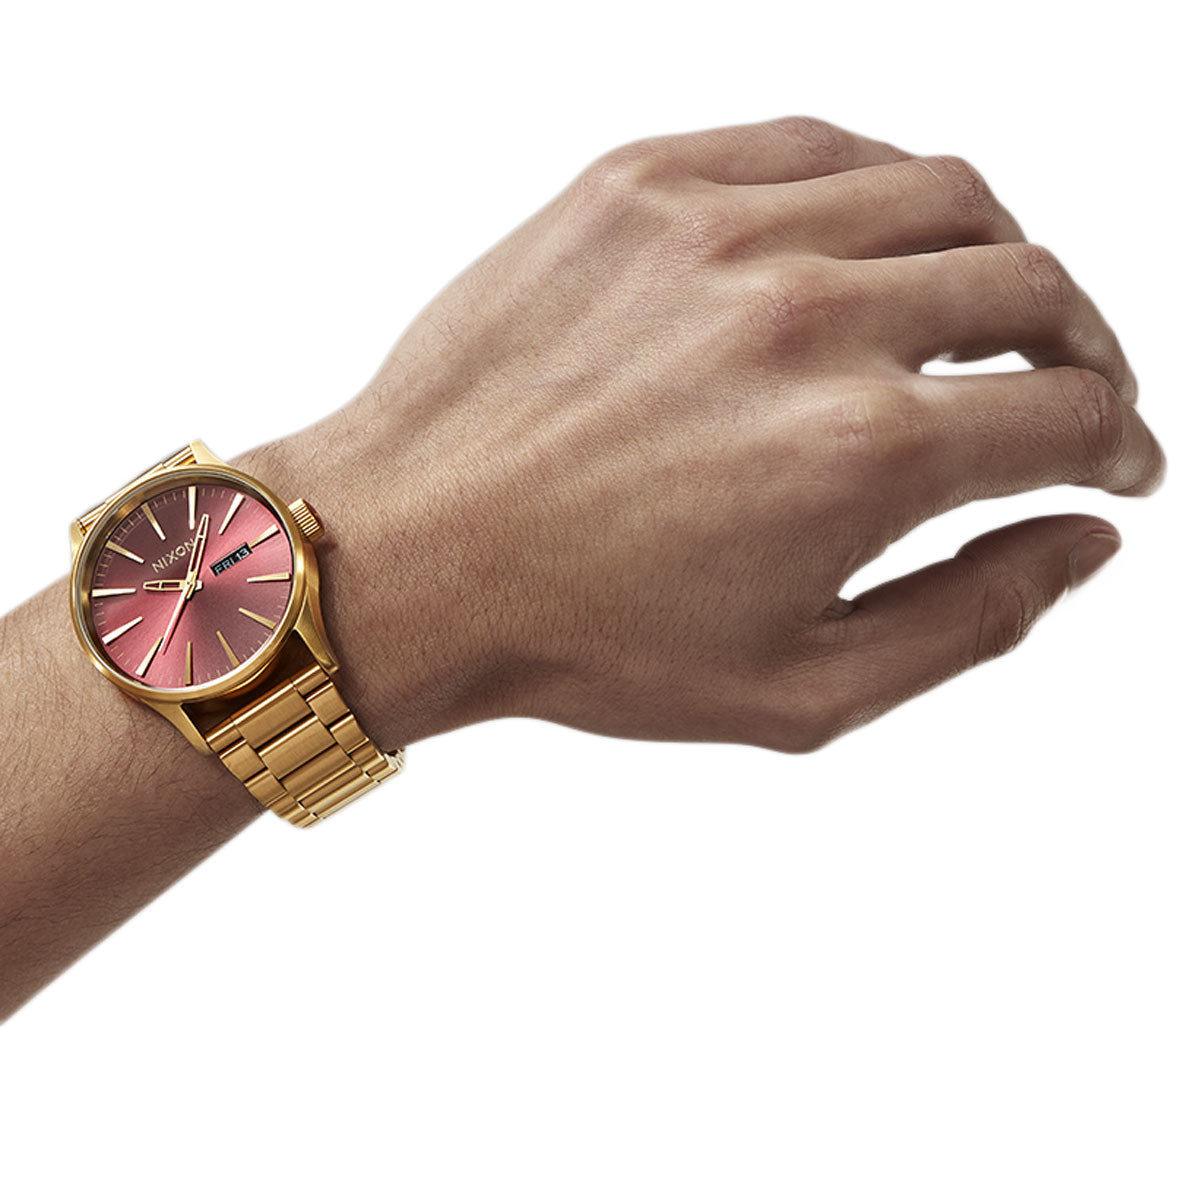 Nixon Sentry Stainless Steel Watch - Oxblood Sunray/Gold image 5